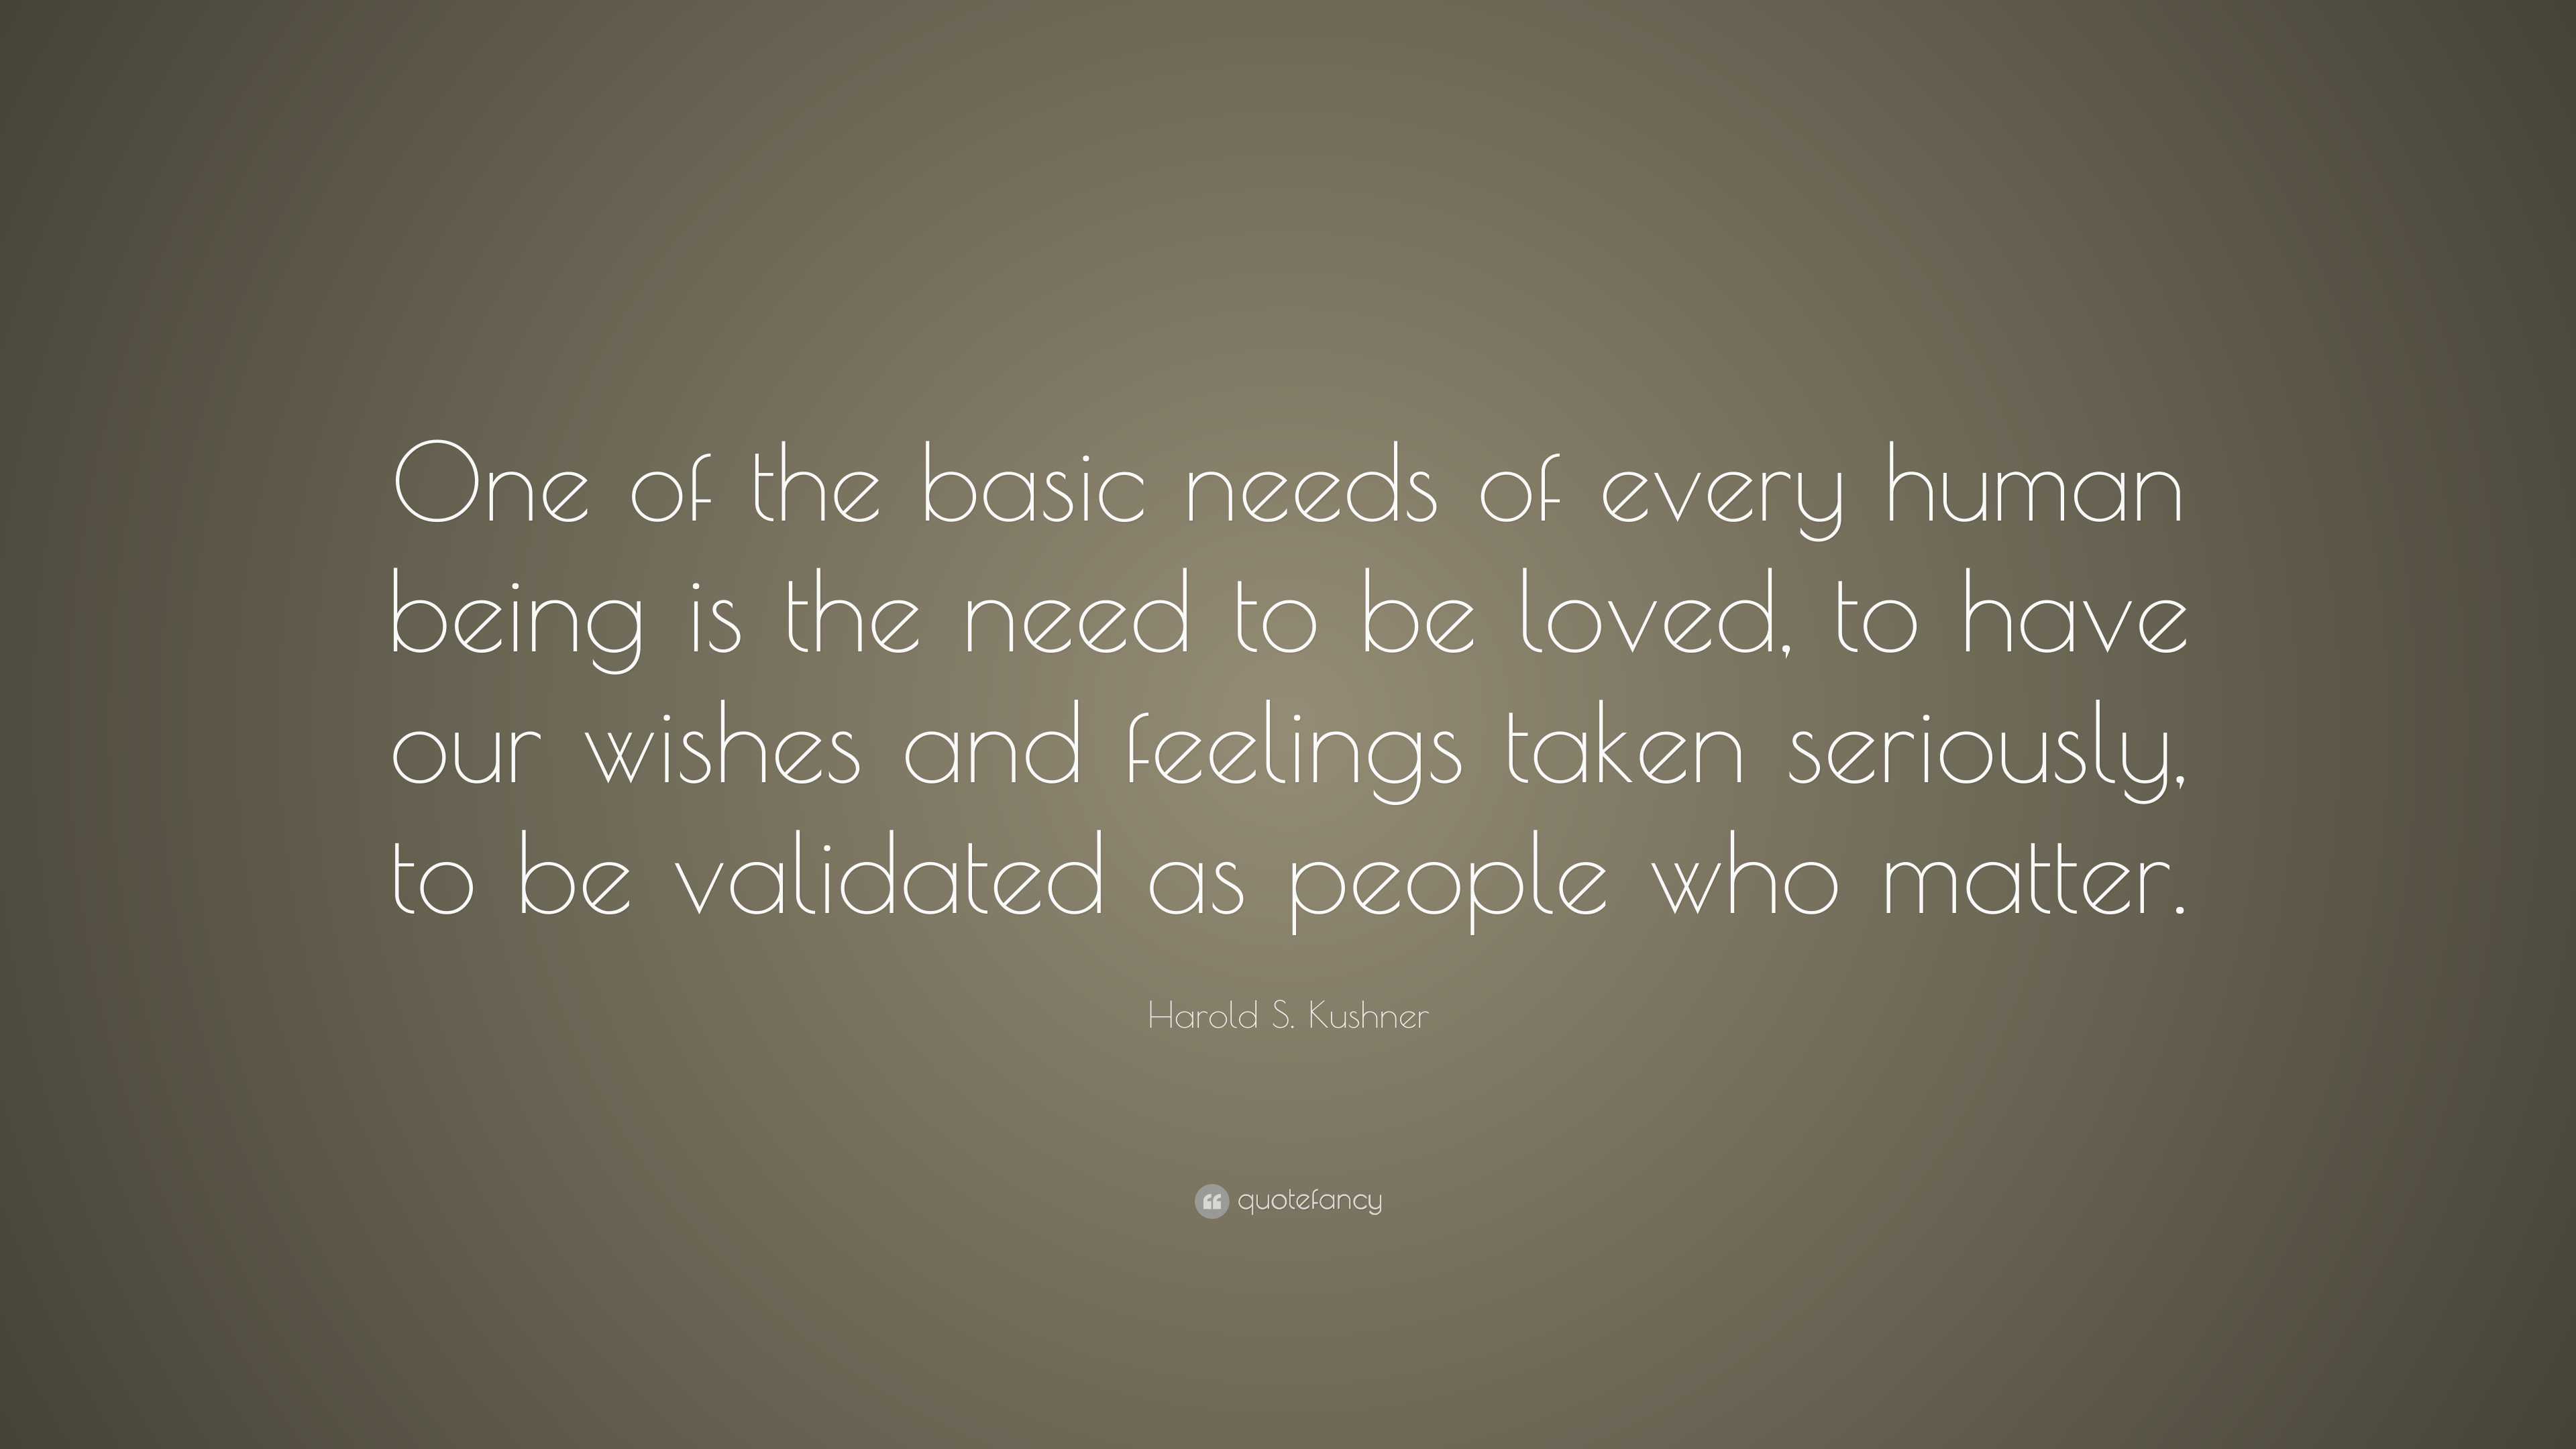 Harold S Kushner Quote “one Of The Basic Needs Of Every Human Being Is The Need To Be Loved